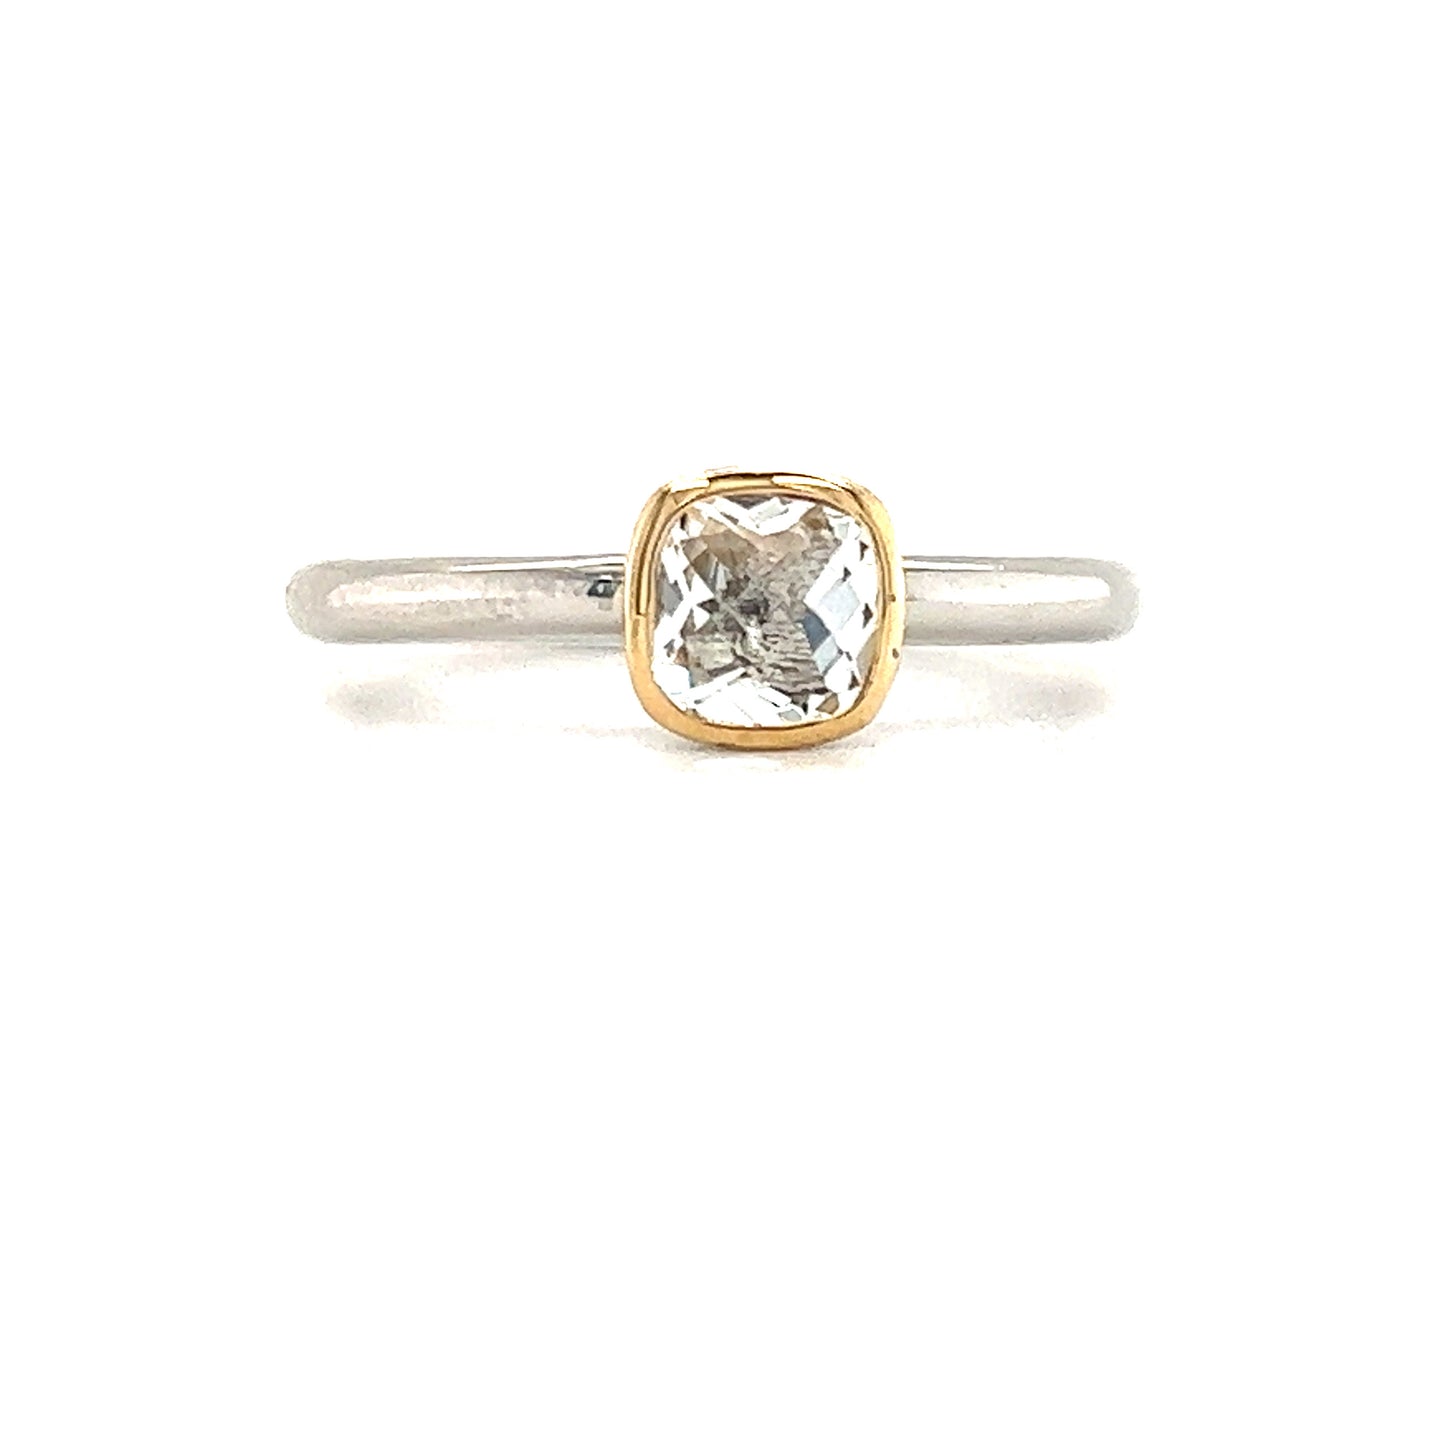 Cushion White Topaz Ring in Sterling Silver with 14K Yellow Gold Accent Front View